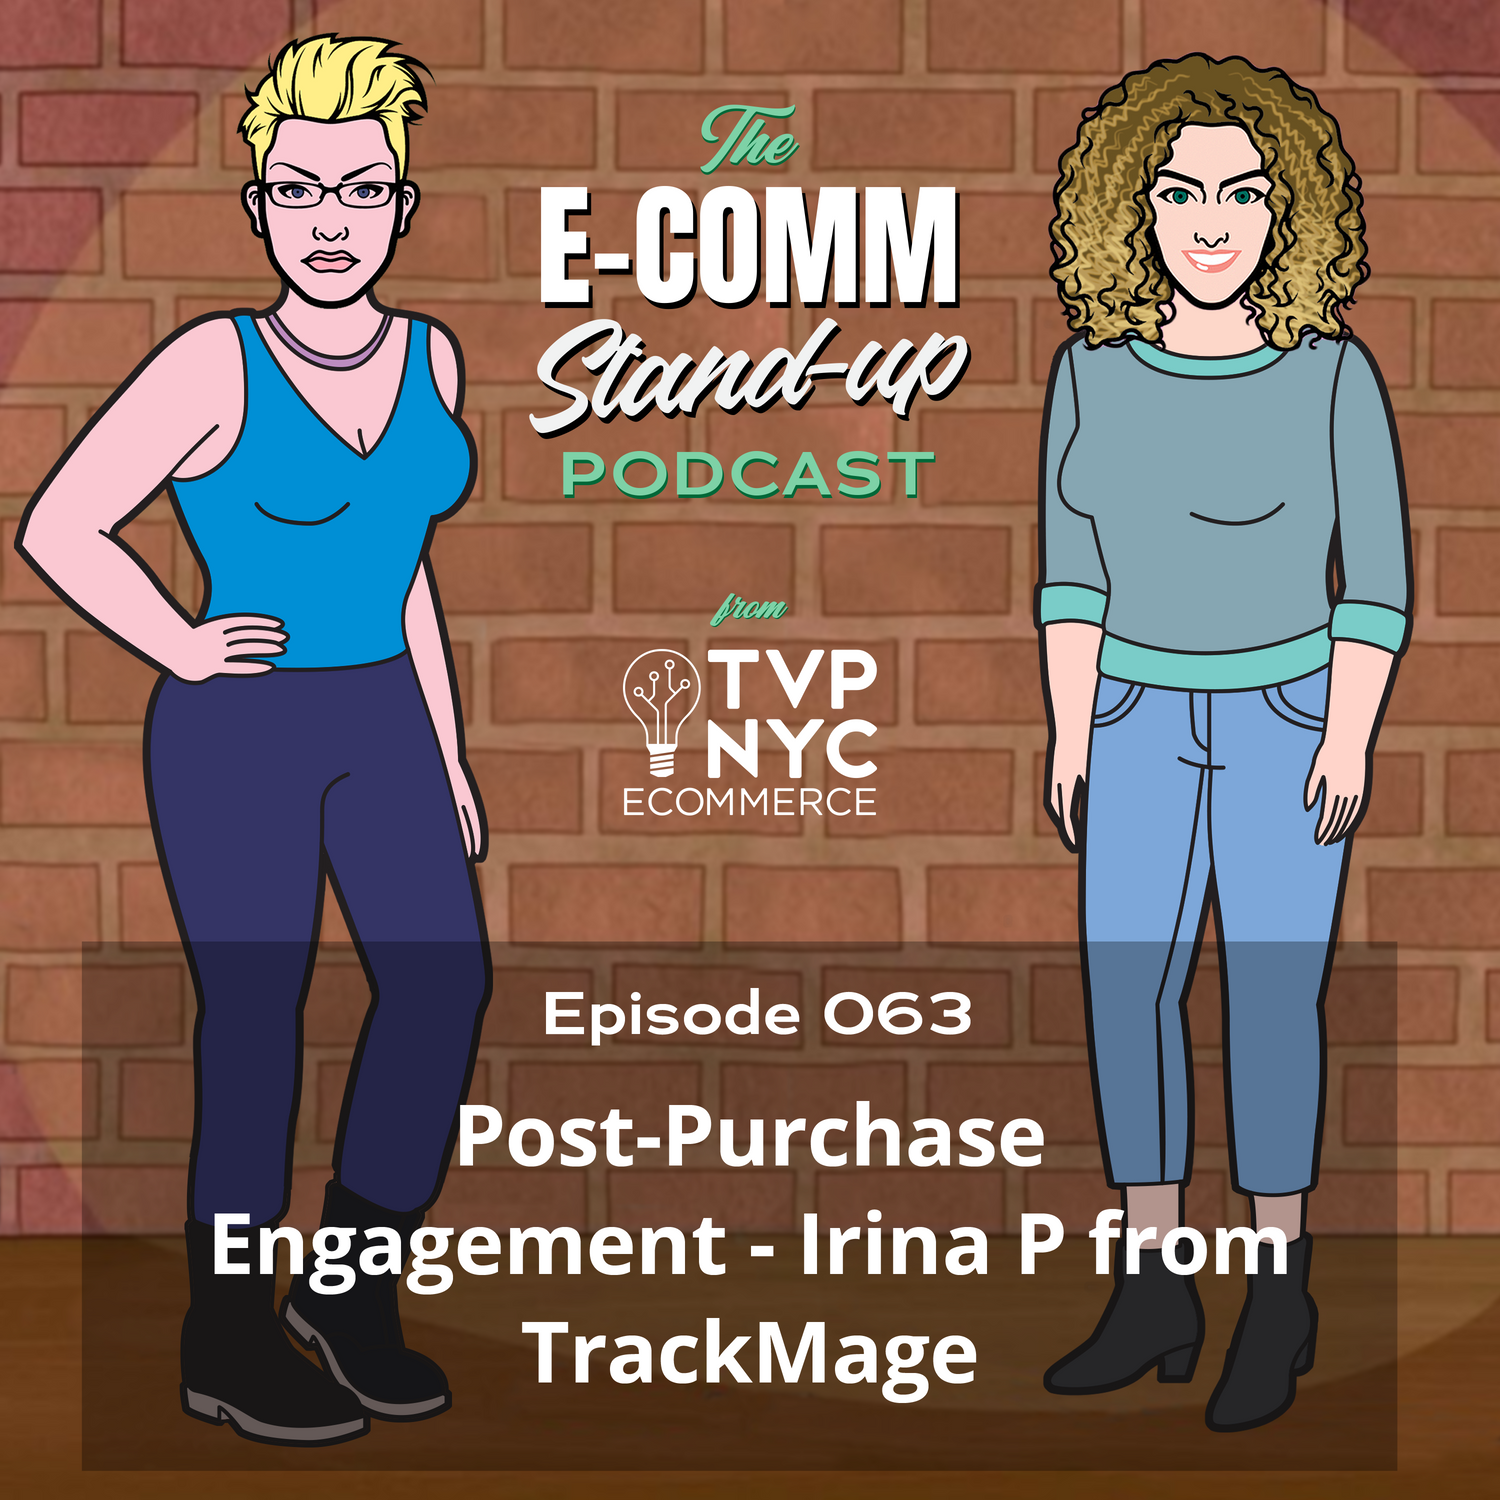 Post-Purchase Engagement - Irina P from TrackMage